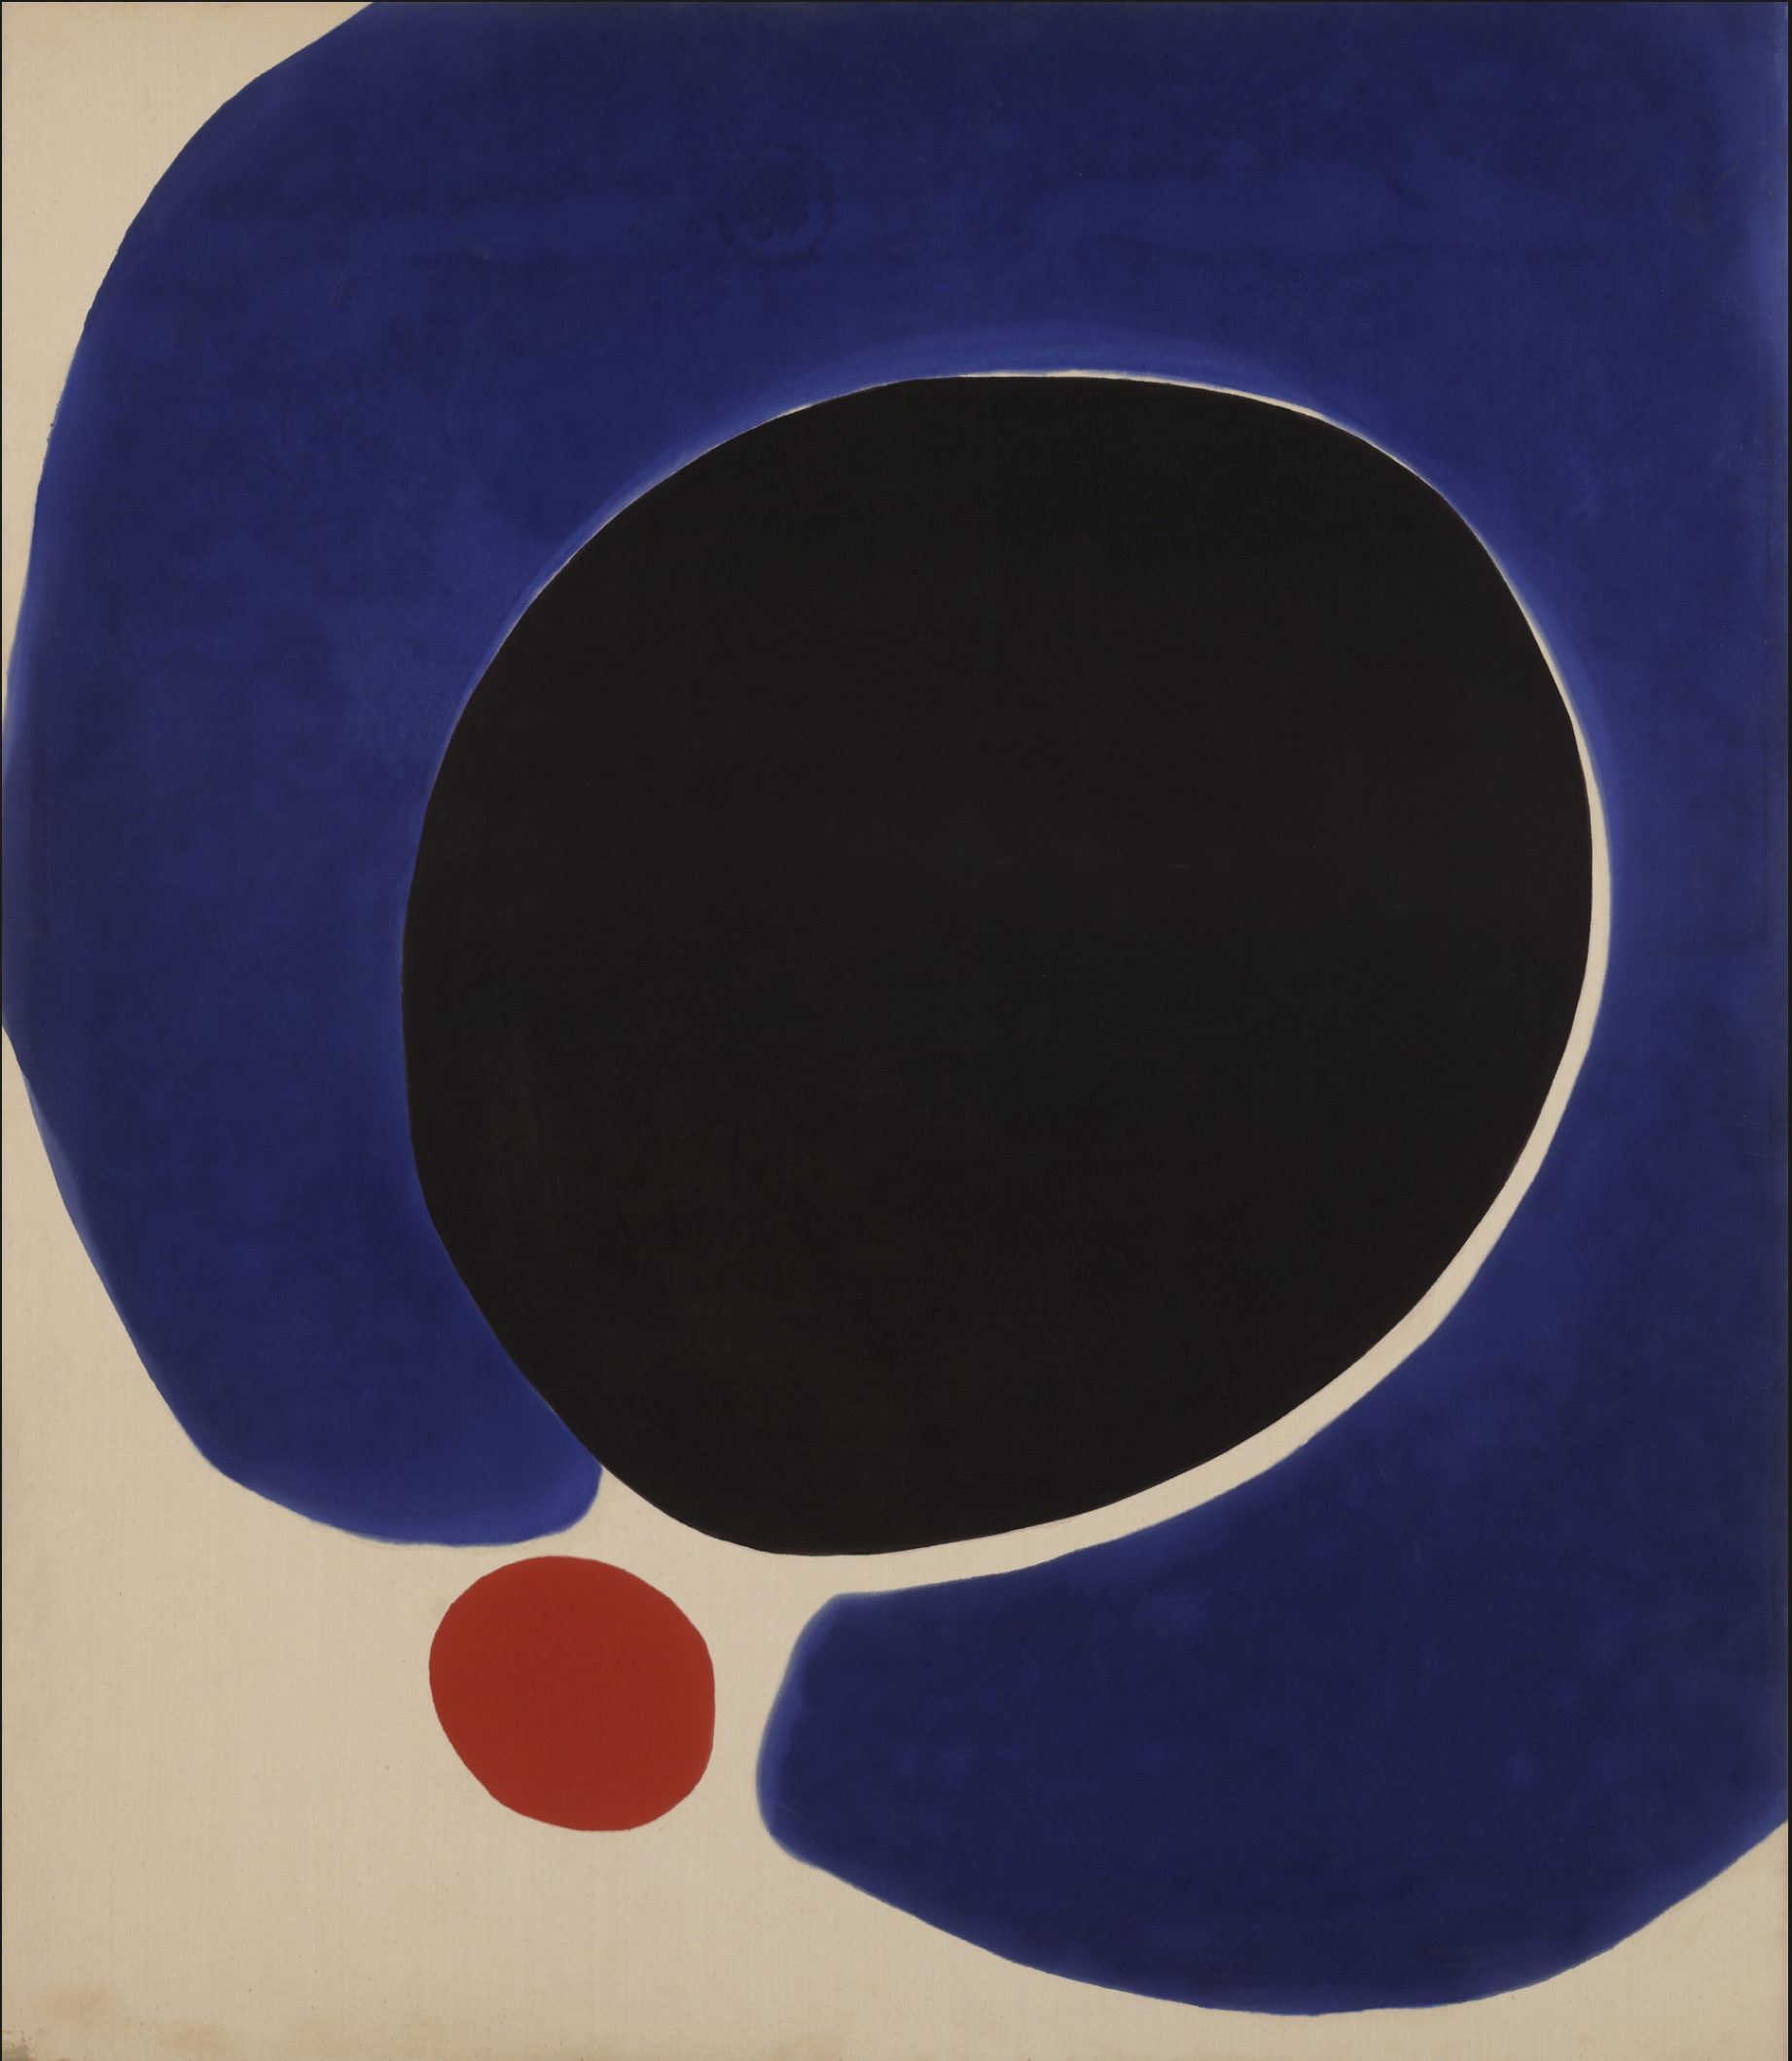 "Cleopatra Flesh" by Jules Olitski, 1962, an abstract composition with a large blue shape surrounding a black circle and a contrasting red circle on a pale background, creating tension within the composition.